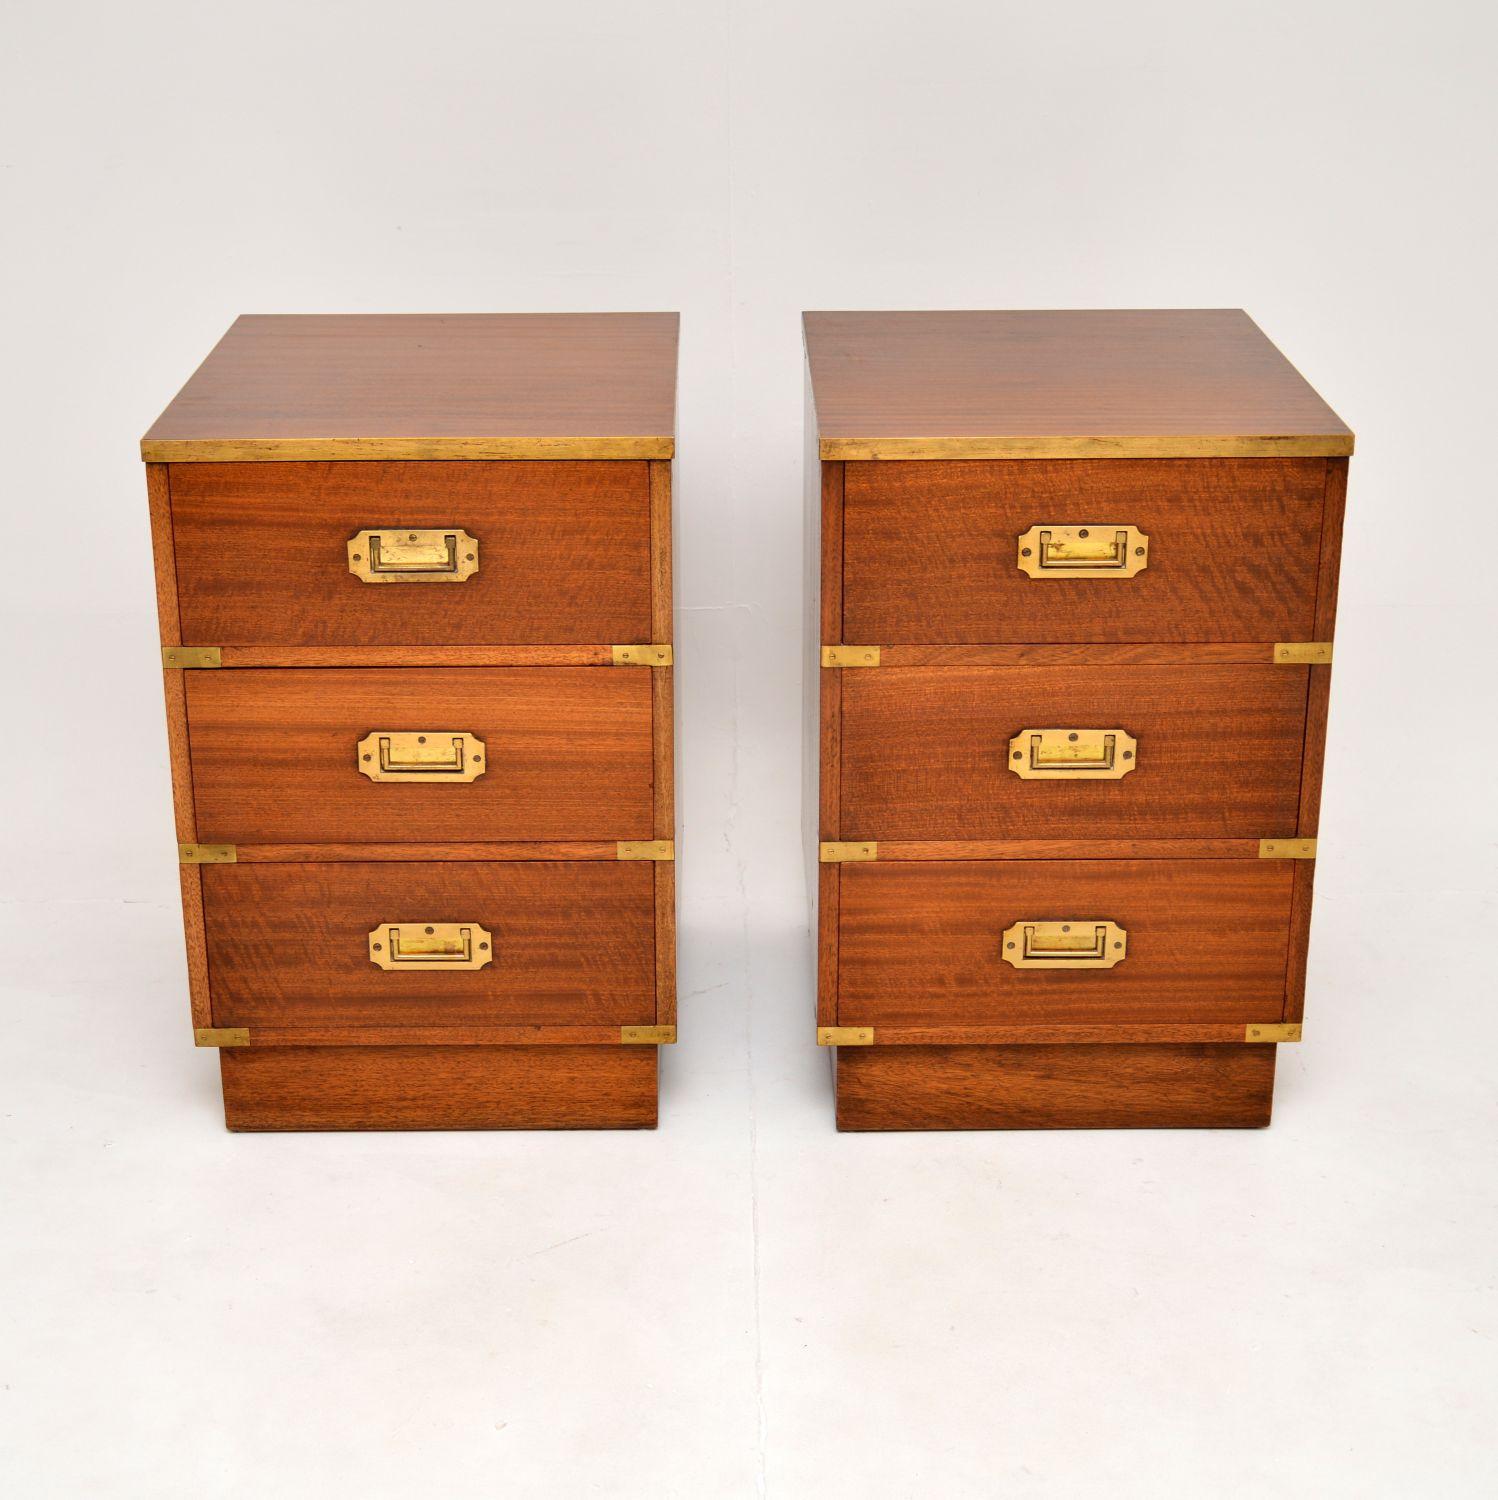 A fantastic pair of antique military campaign style chests. They were made in England, they date from around the 1950’s.

They are of superb quality and are a large, impressive size. Each has lovely inset brass military handles, brass rims around